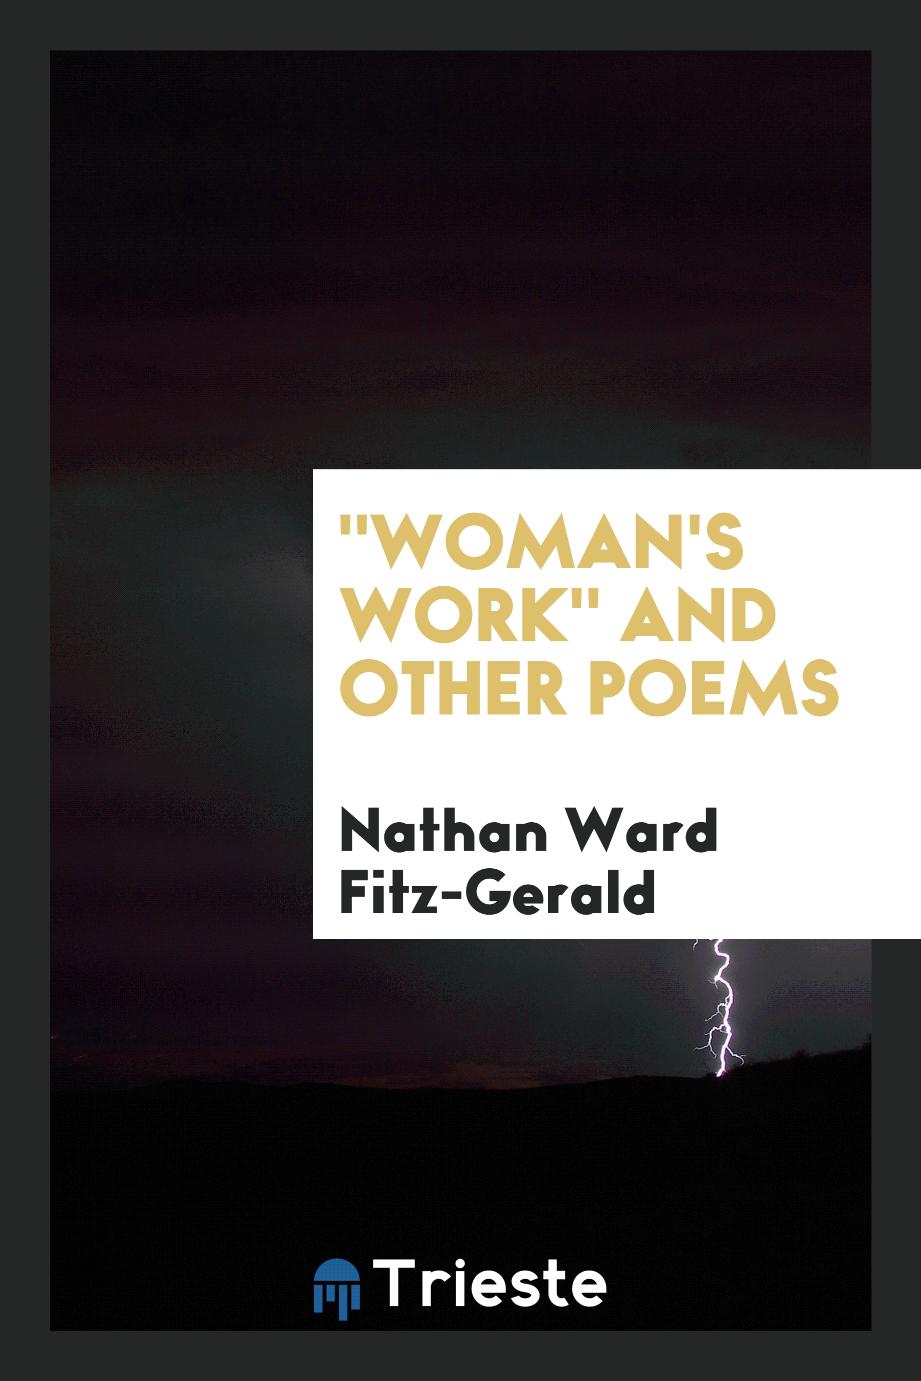 "Woman's Work" and Other Poems